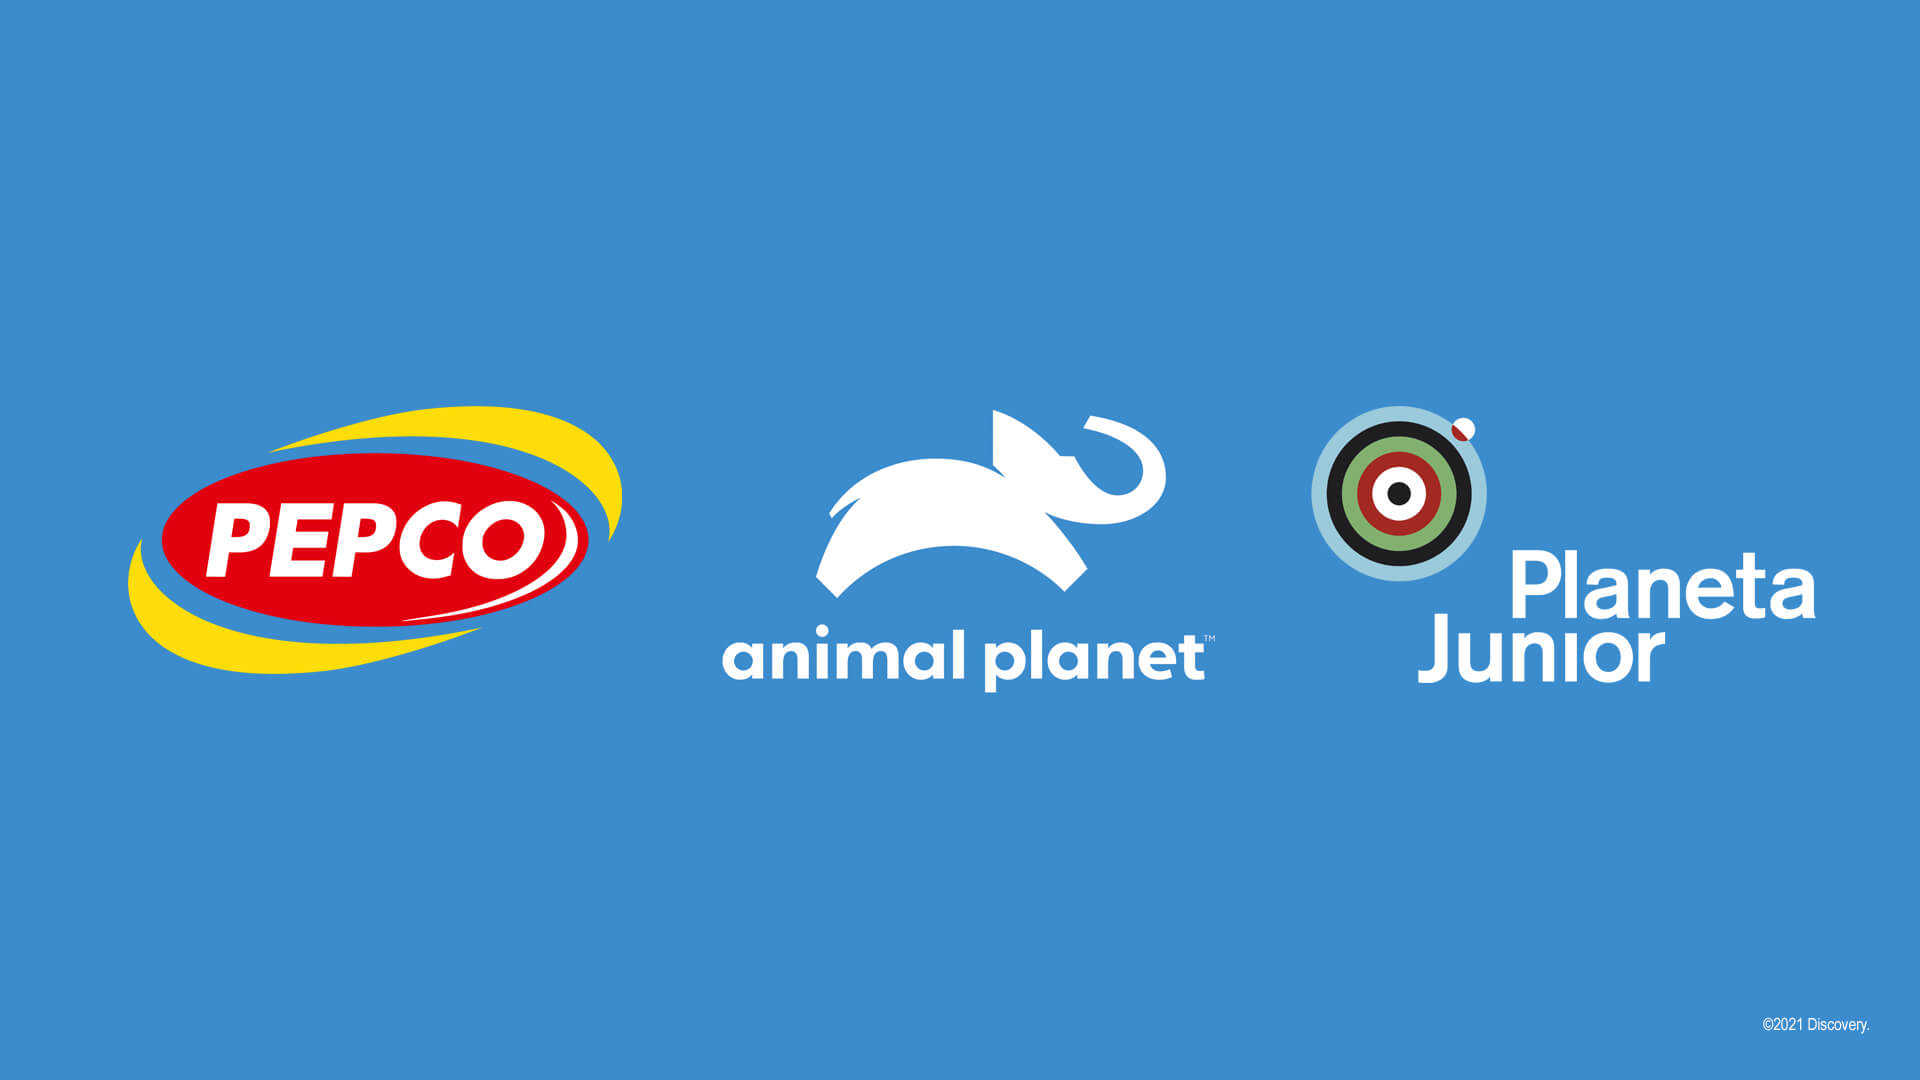 Pepco Launches Animal Planet Collection in Partnership with Planeta Junior and Discovery image